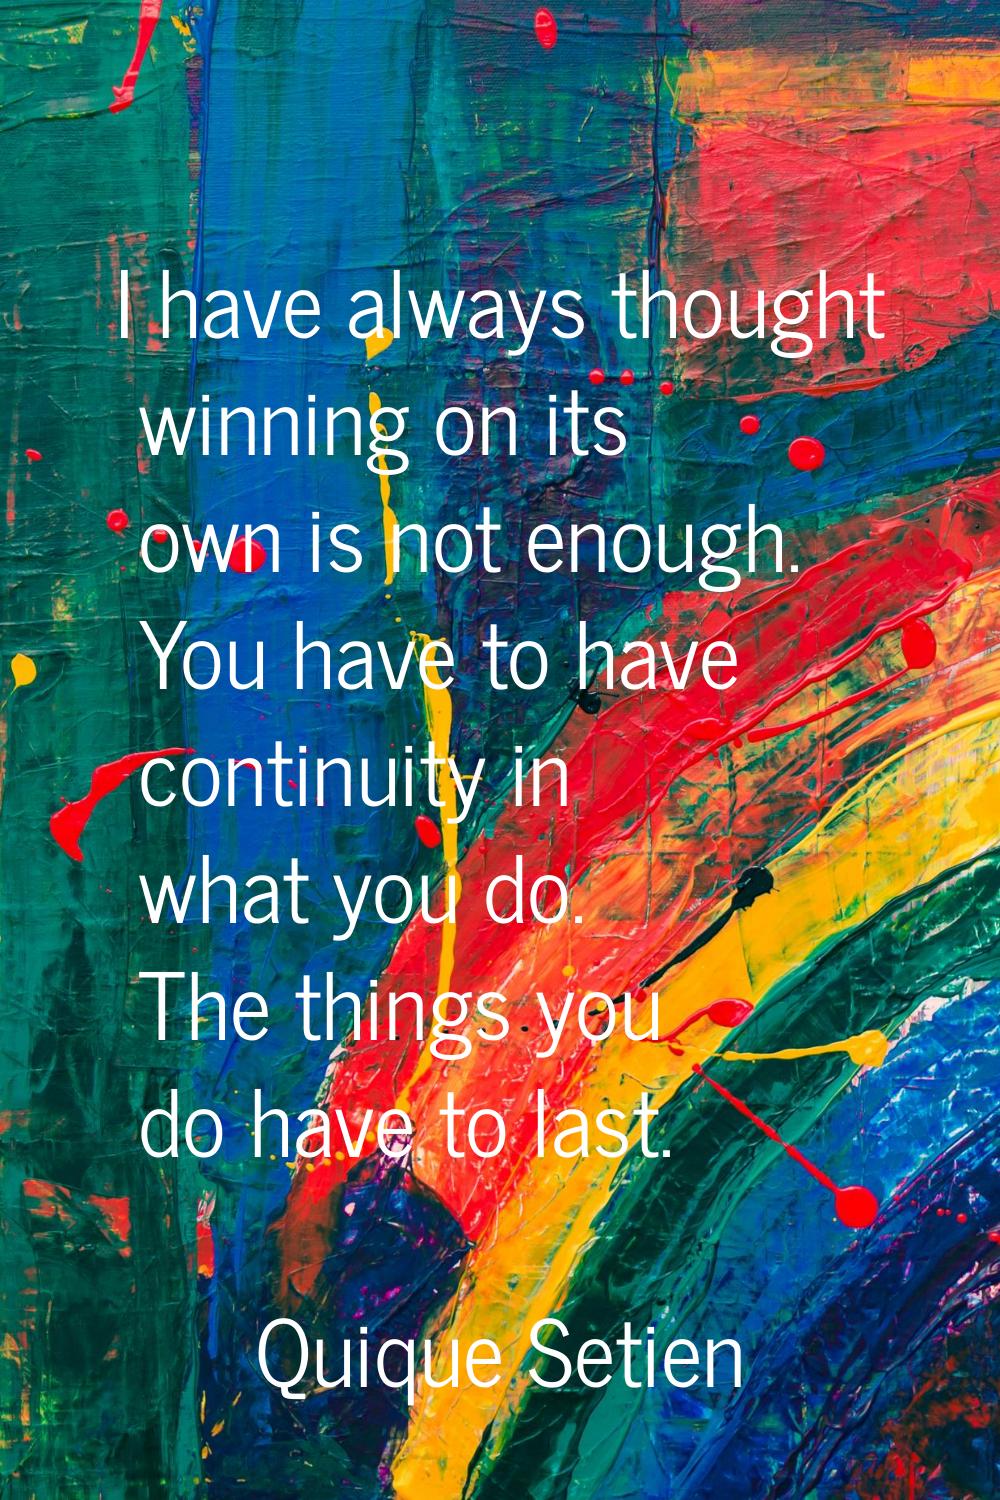 I have always thought winning on its own is not enough. You have to have continuity in what you do.